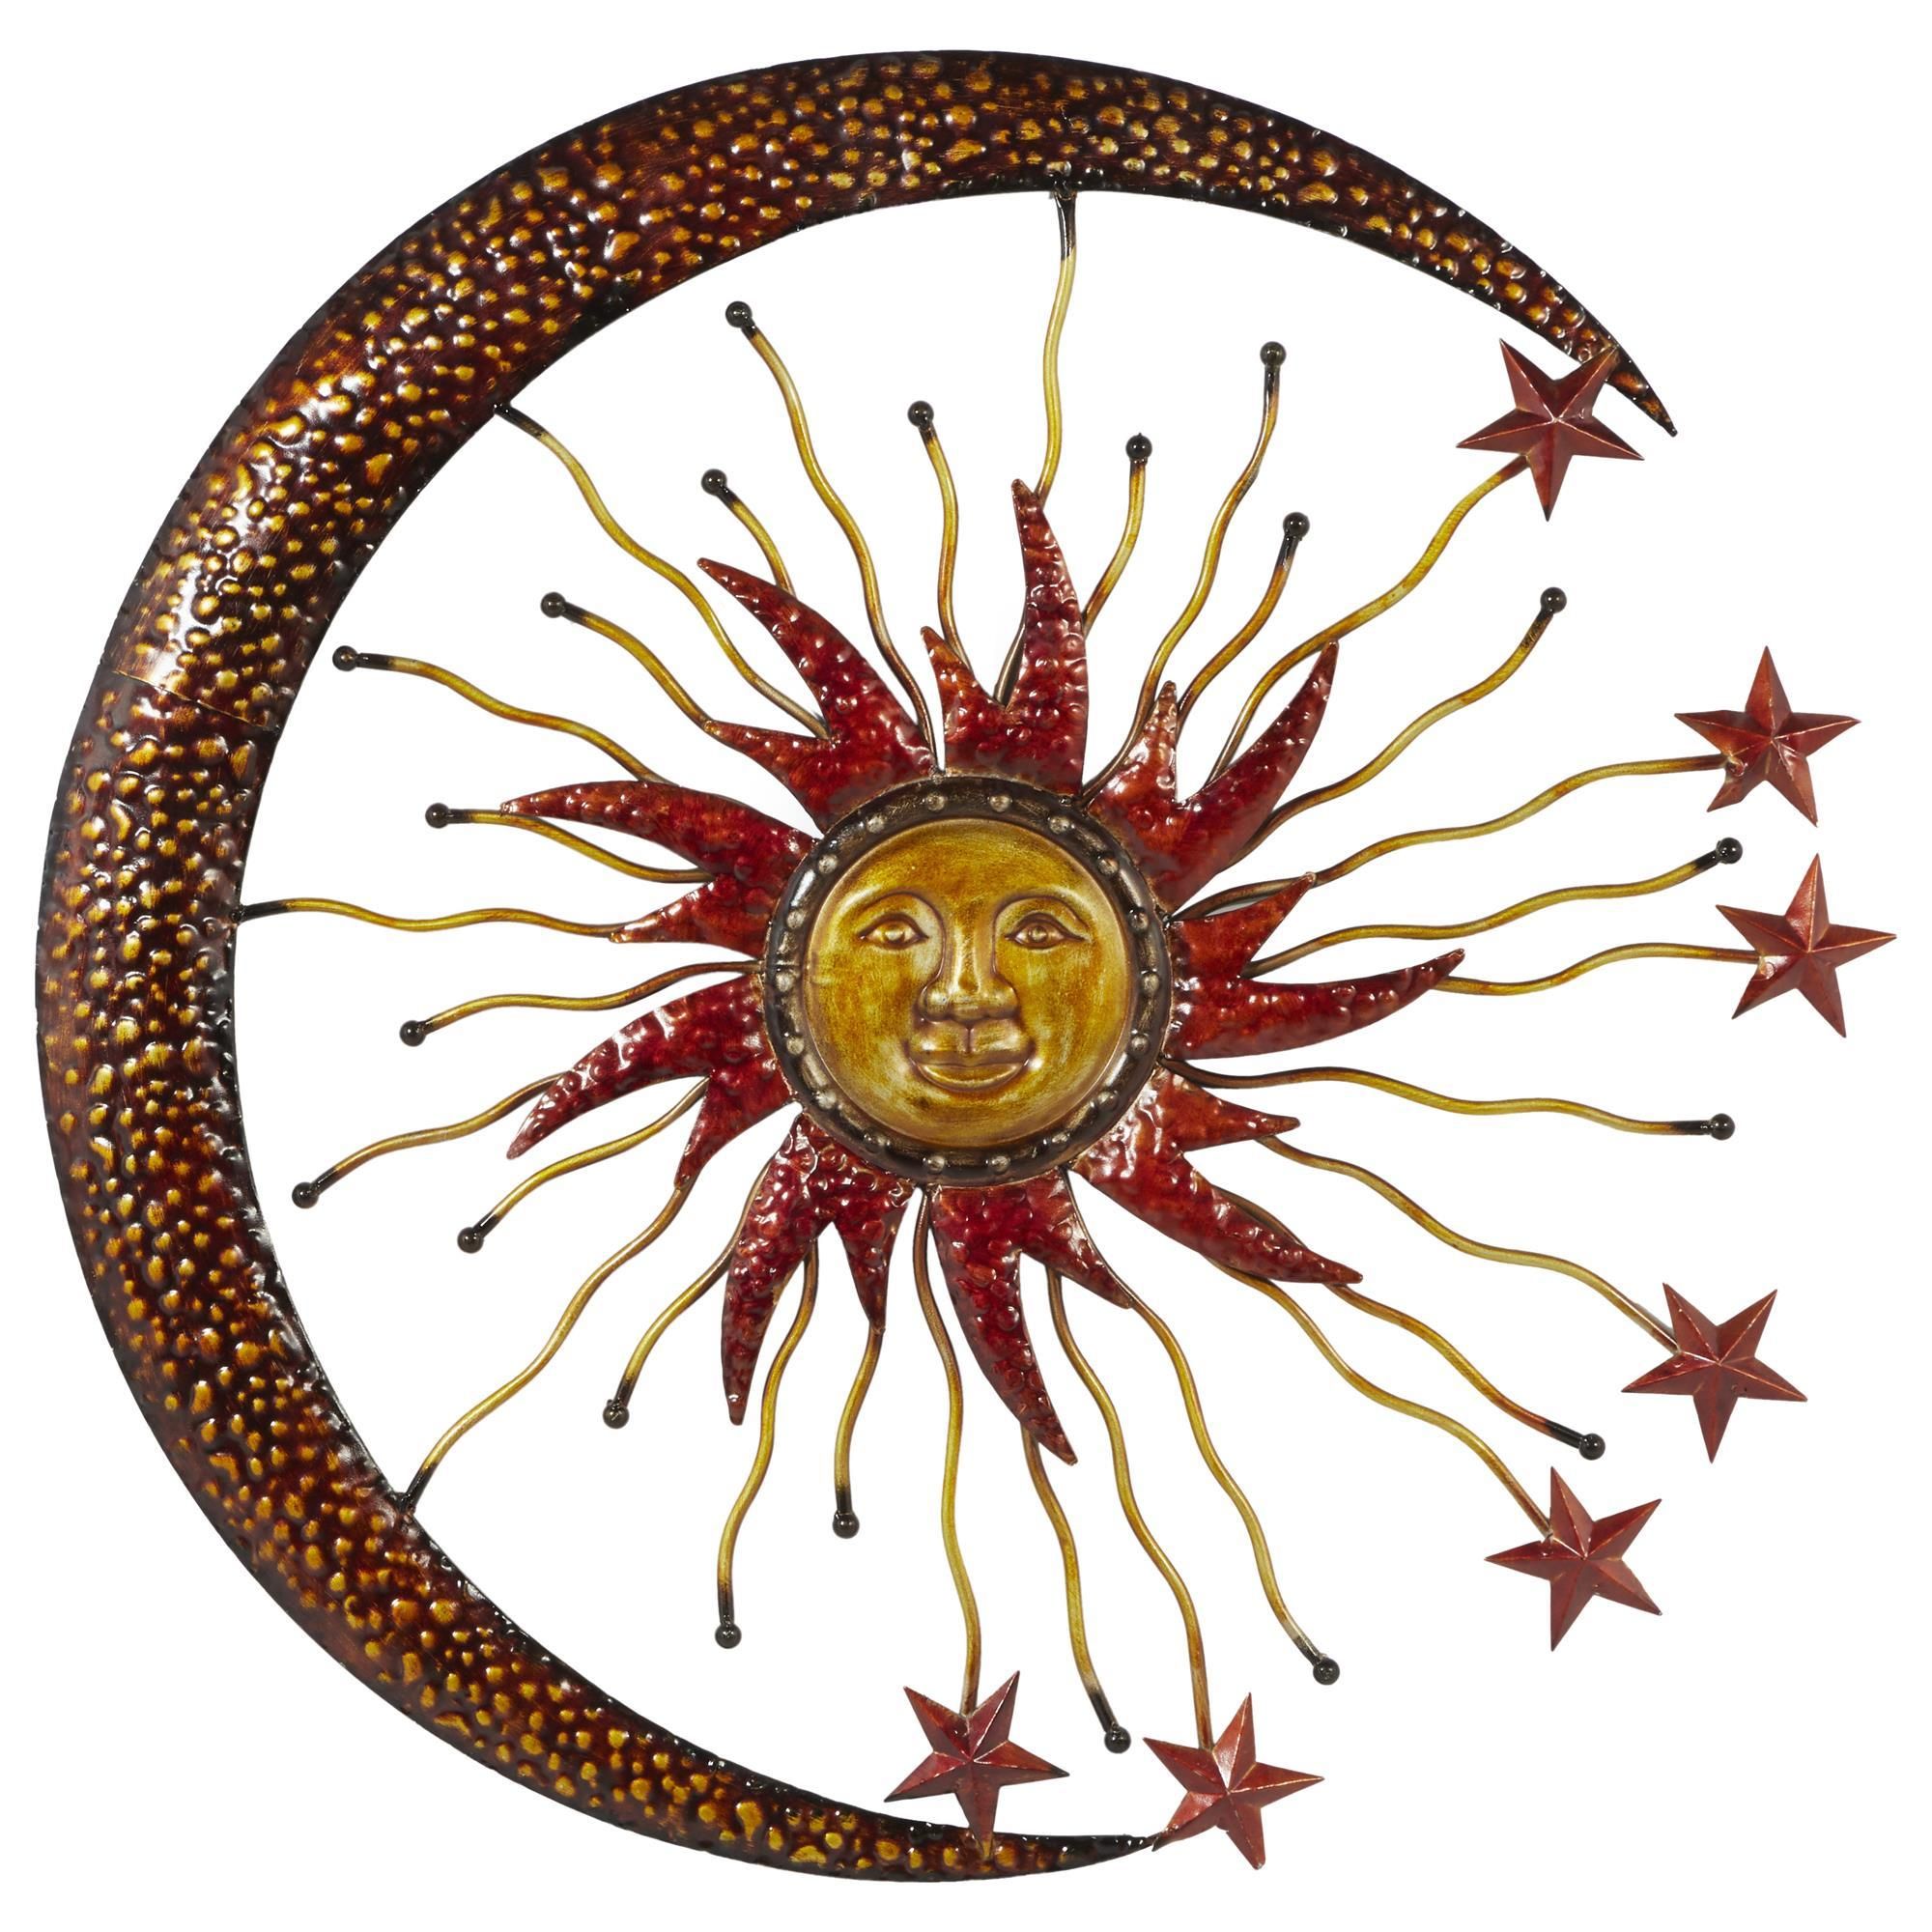 Maple And Jade 36" X 36" Sun, Moon And Star Wall Decor In Metallic Copper  And Bronze | Nfm Throughout Sun Moon Star Wall Art (View 14 of 15)